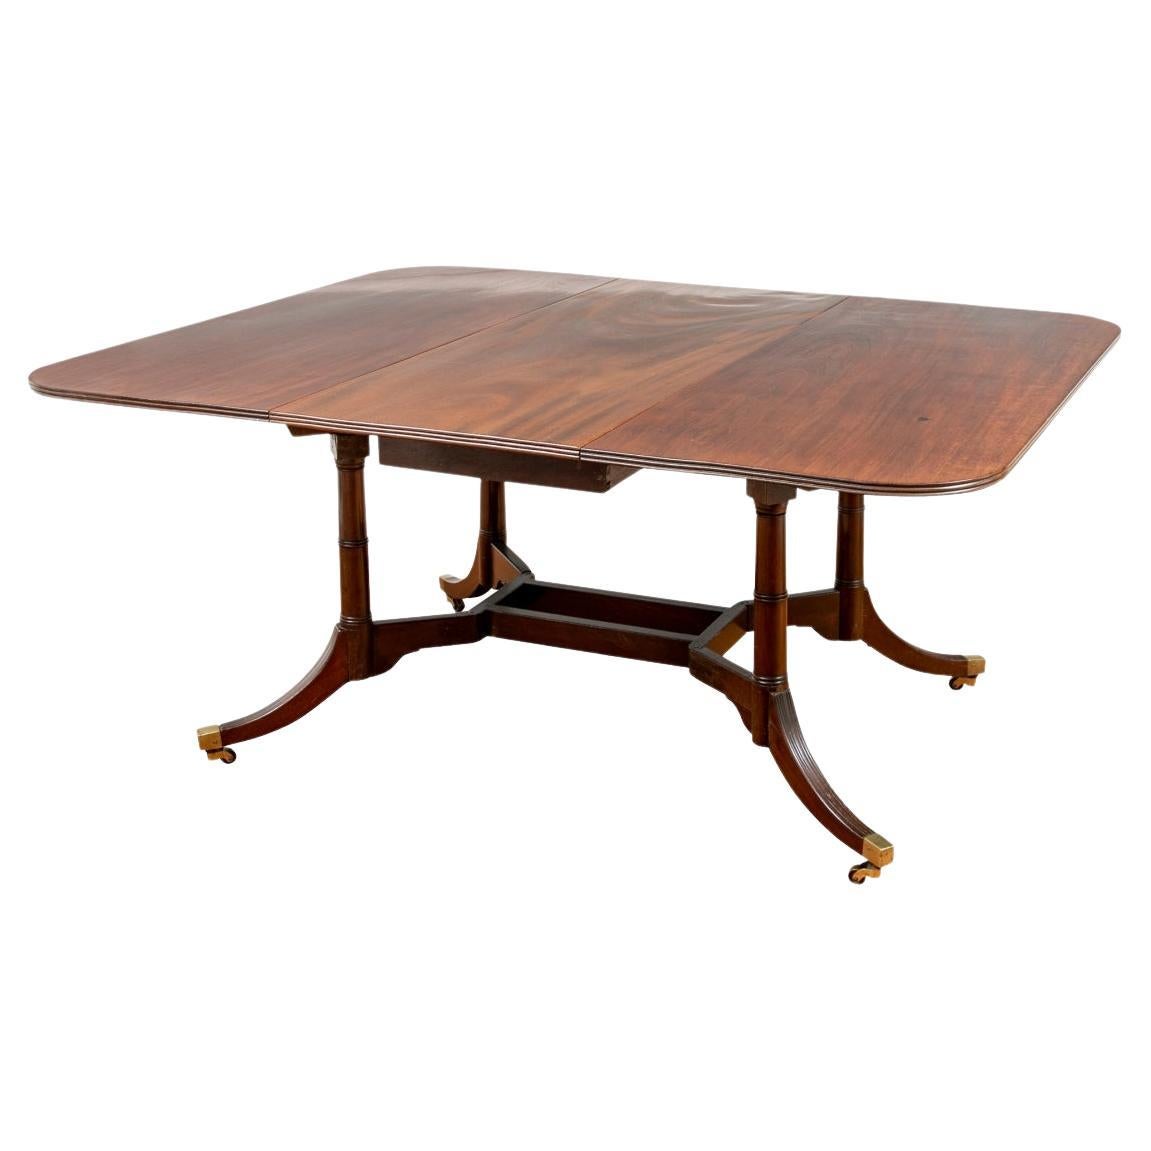 A Rare George III Cumberland Action Mahogany Drop-Leaf Dining Table c. 1800-1820